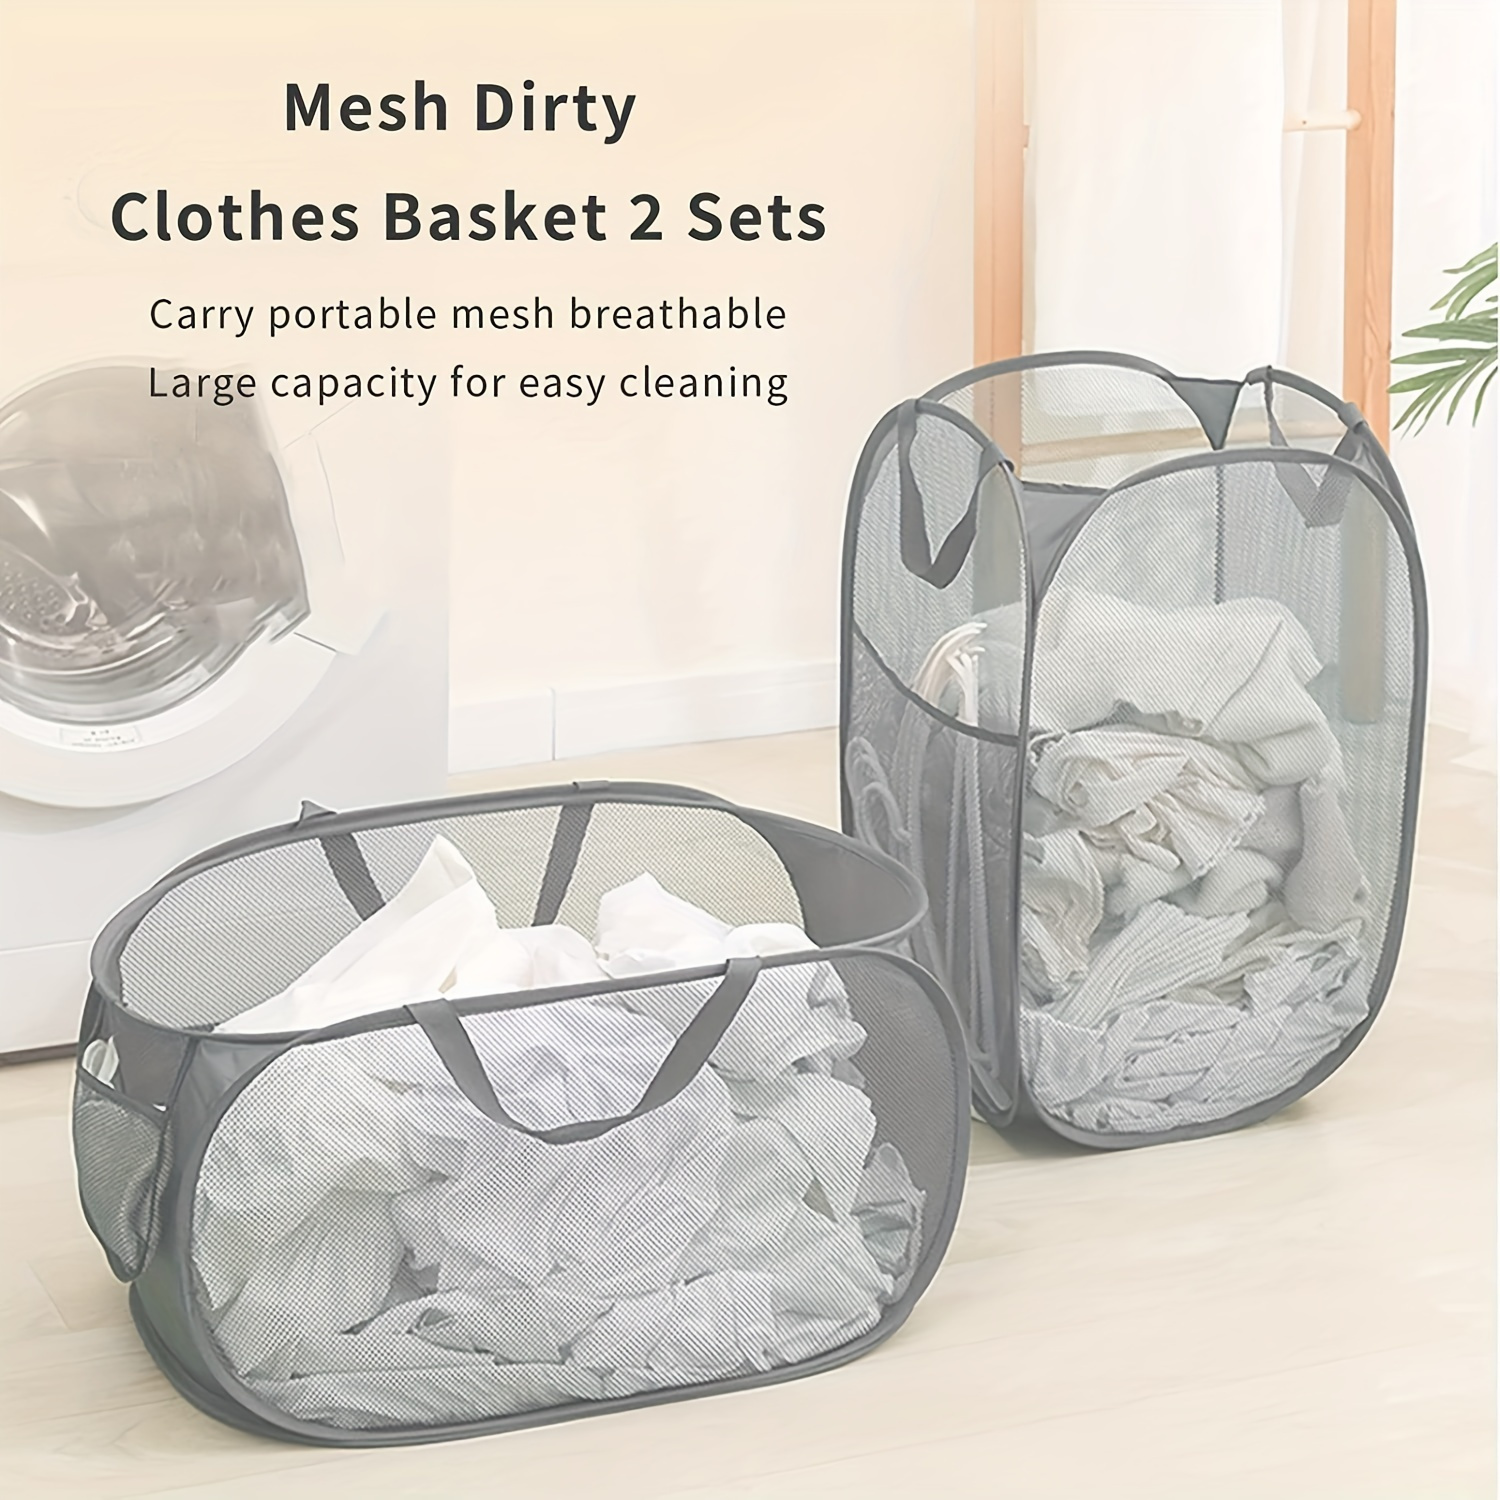 3PCS Hanging Mesh Bag For Clothes / Bra / Socks-mesh Laundry Bag,hotel Mesh Laundry  Hamper For Help Drying Clothes On The Journey,hotel Storing  Clothes,business Travel Helper Pink 